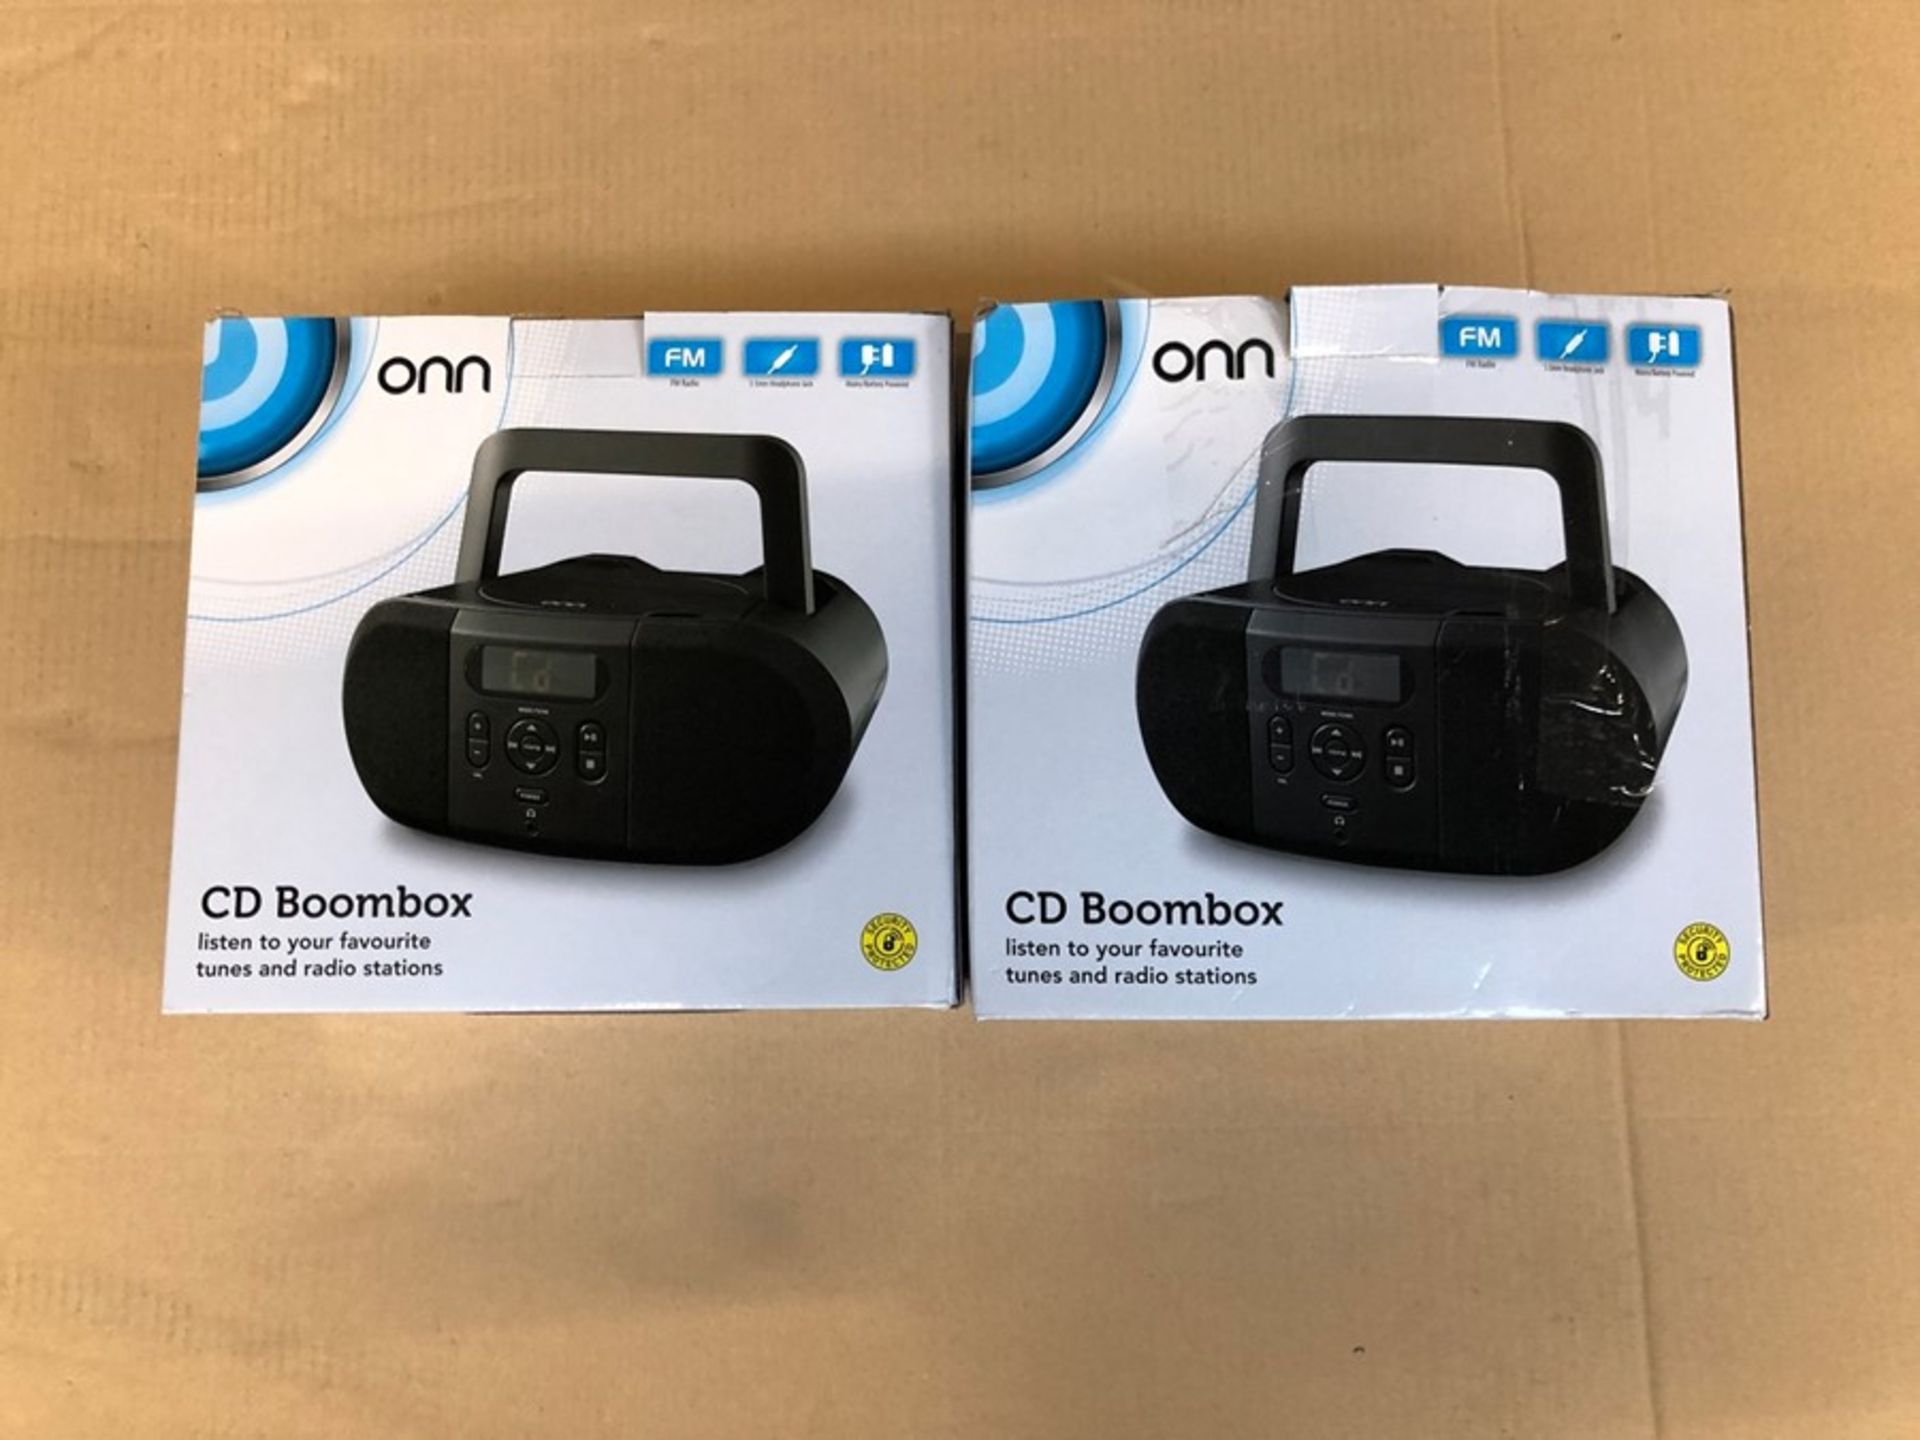 1 LOT TO CONTAIN 2 BOXED ONN CD BOOMBOXES IN BLACK / BL - 8740 / RRP £40.00 (PUBLIC VIEWING